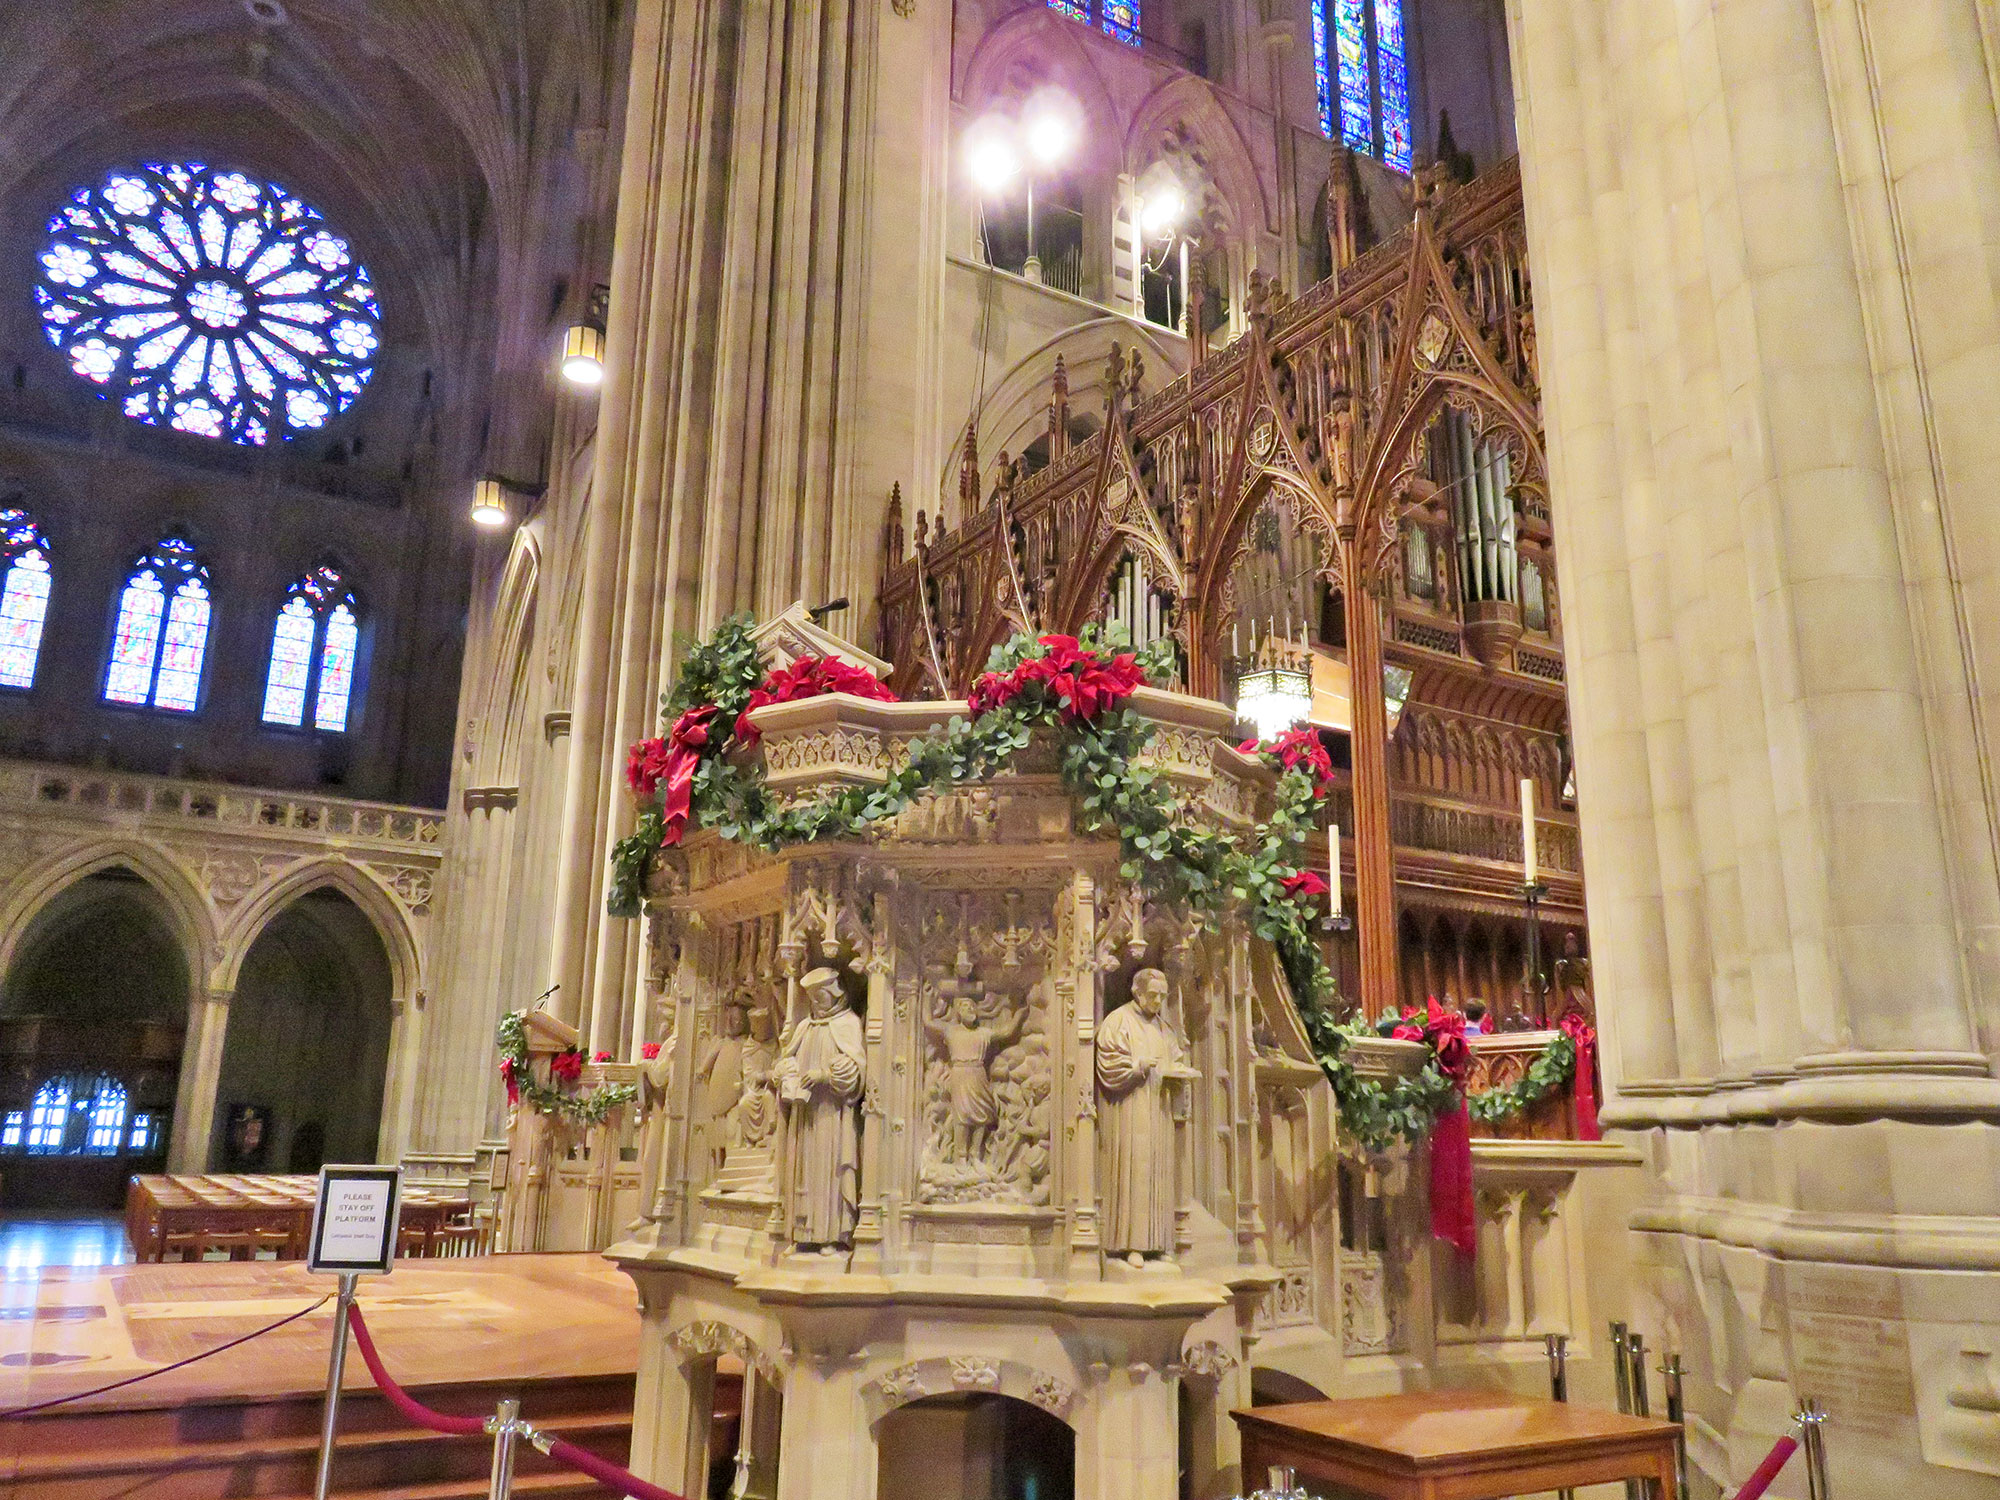 Near the main altar of the Washington National Cathedral.